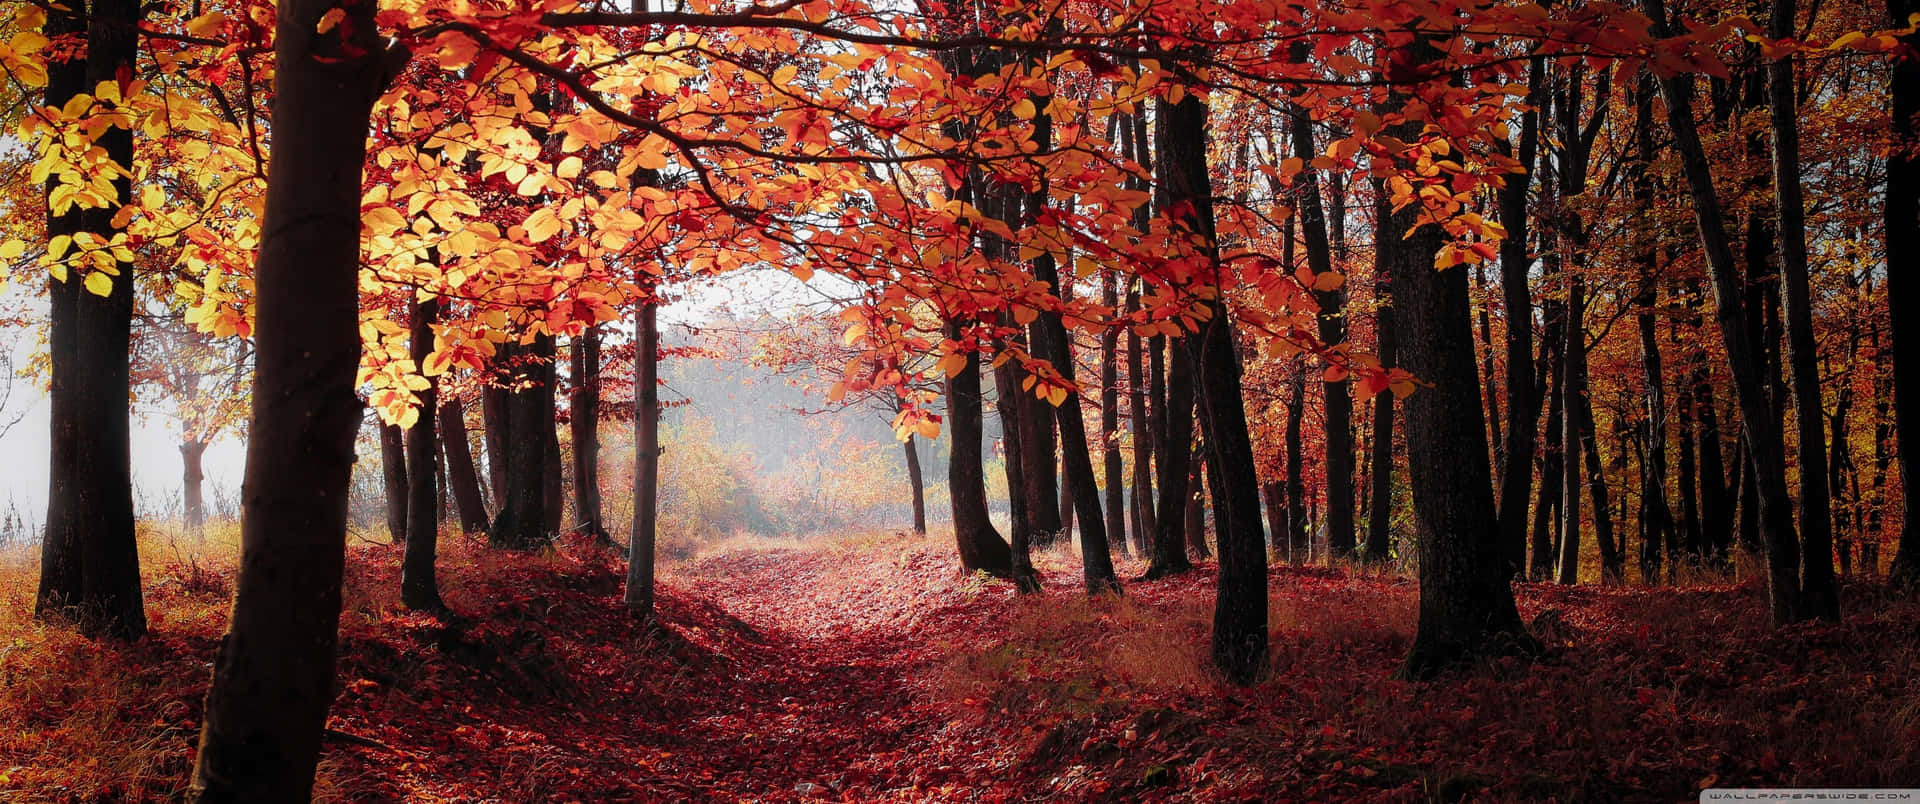 Take in the beauty of a fall landscape Wallpaper